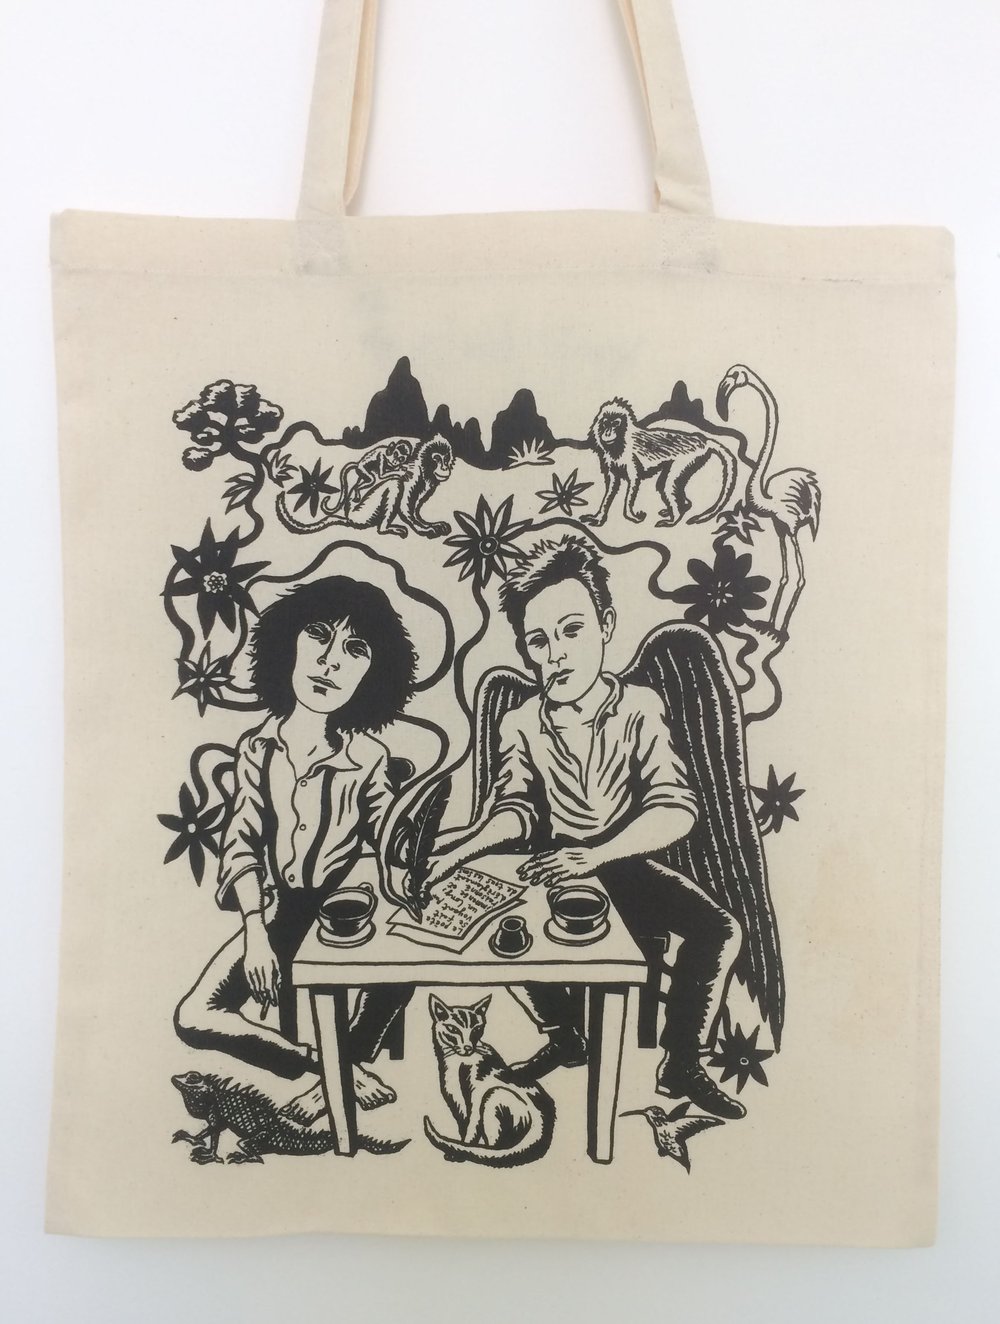 Image of Cosmic Lovers tote bag- Patti Smith and Arthur Rimbaud